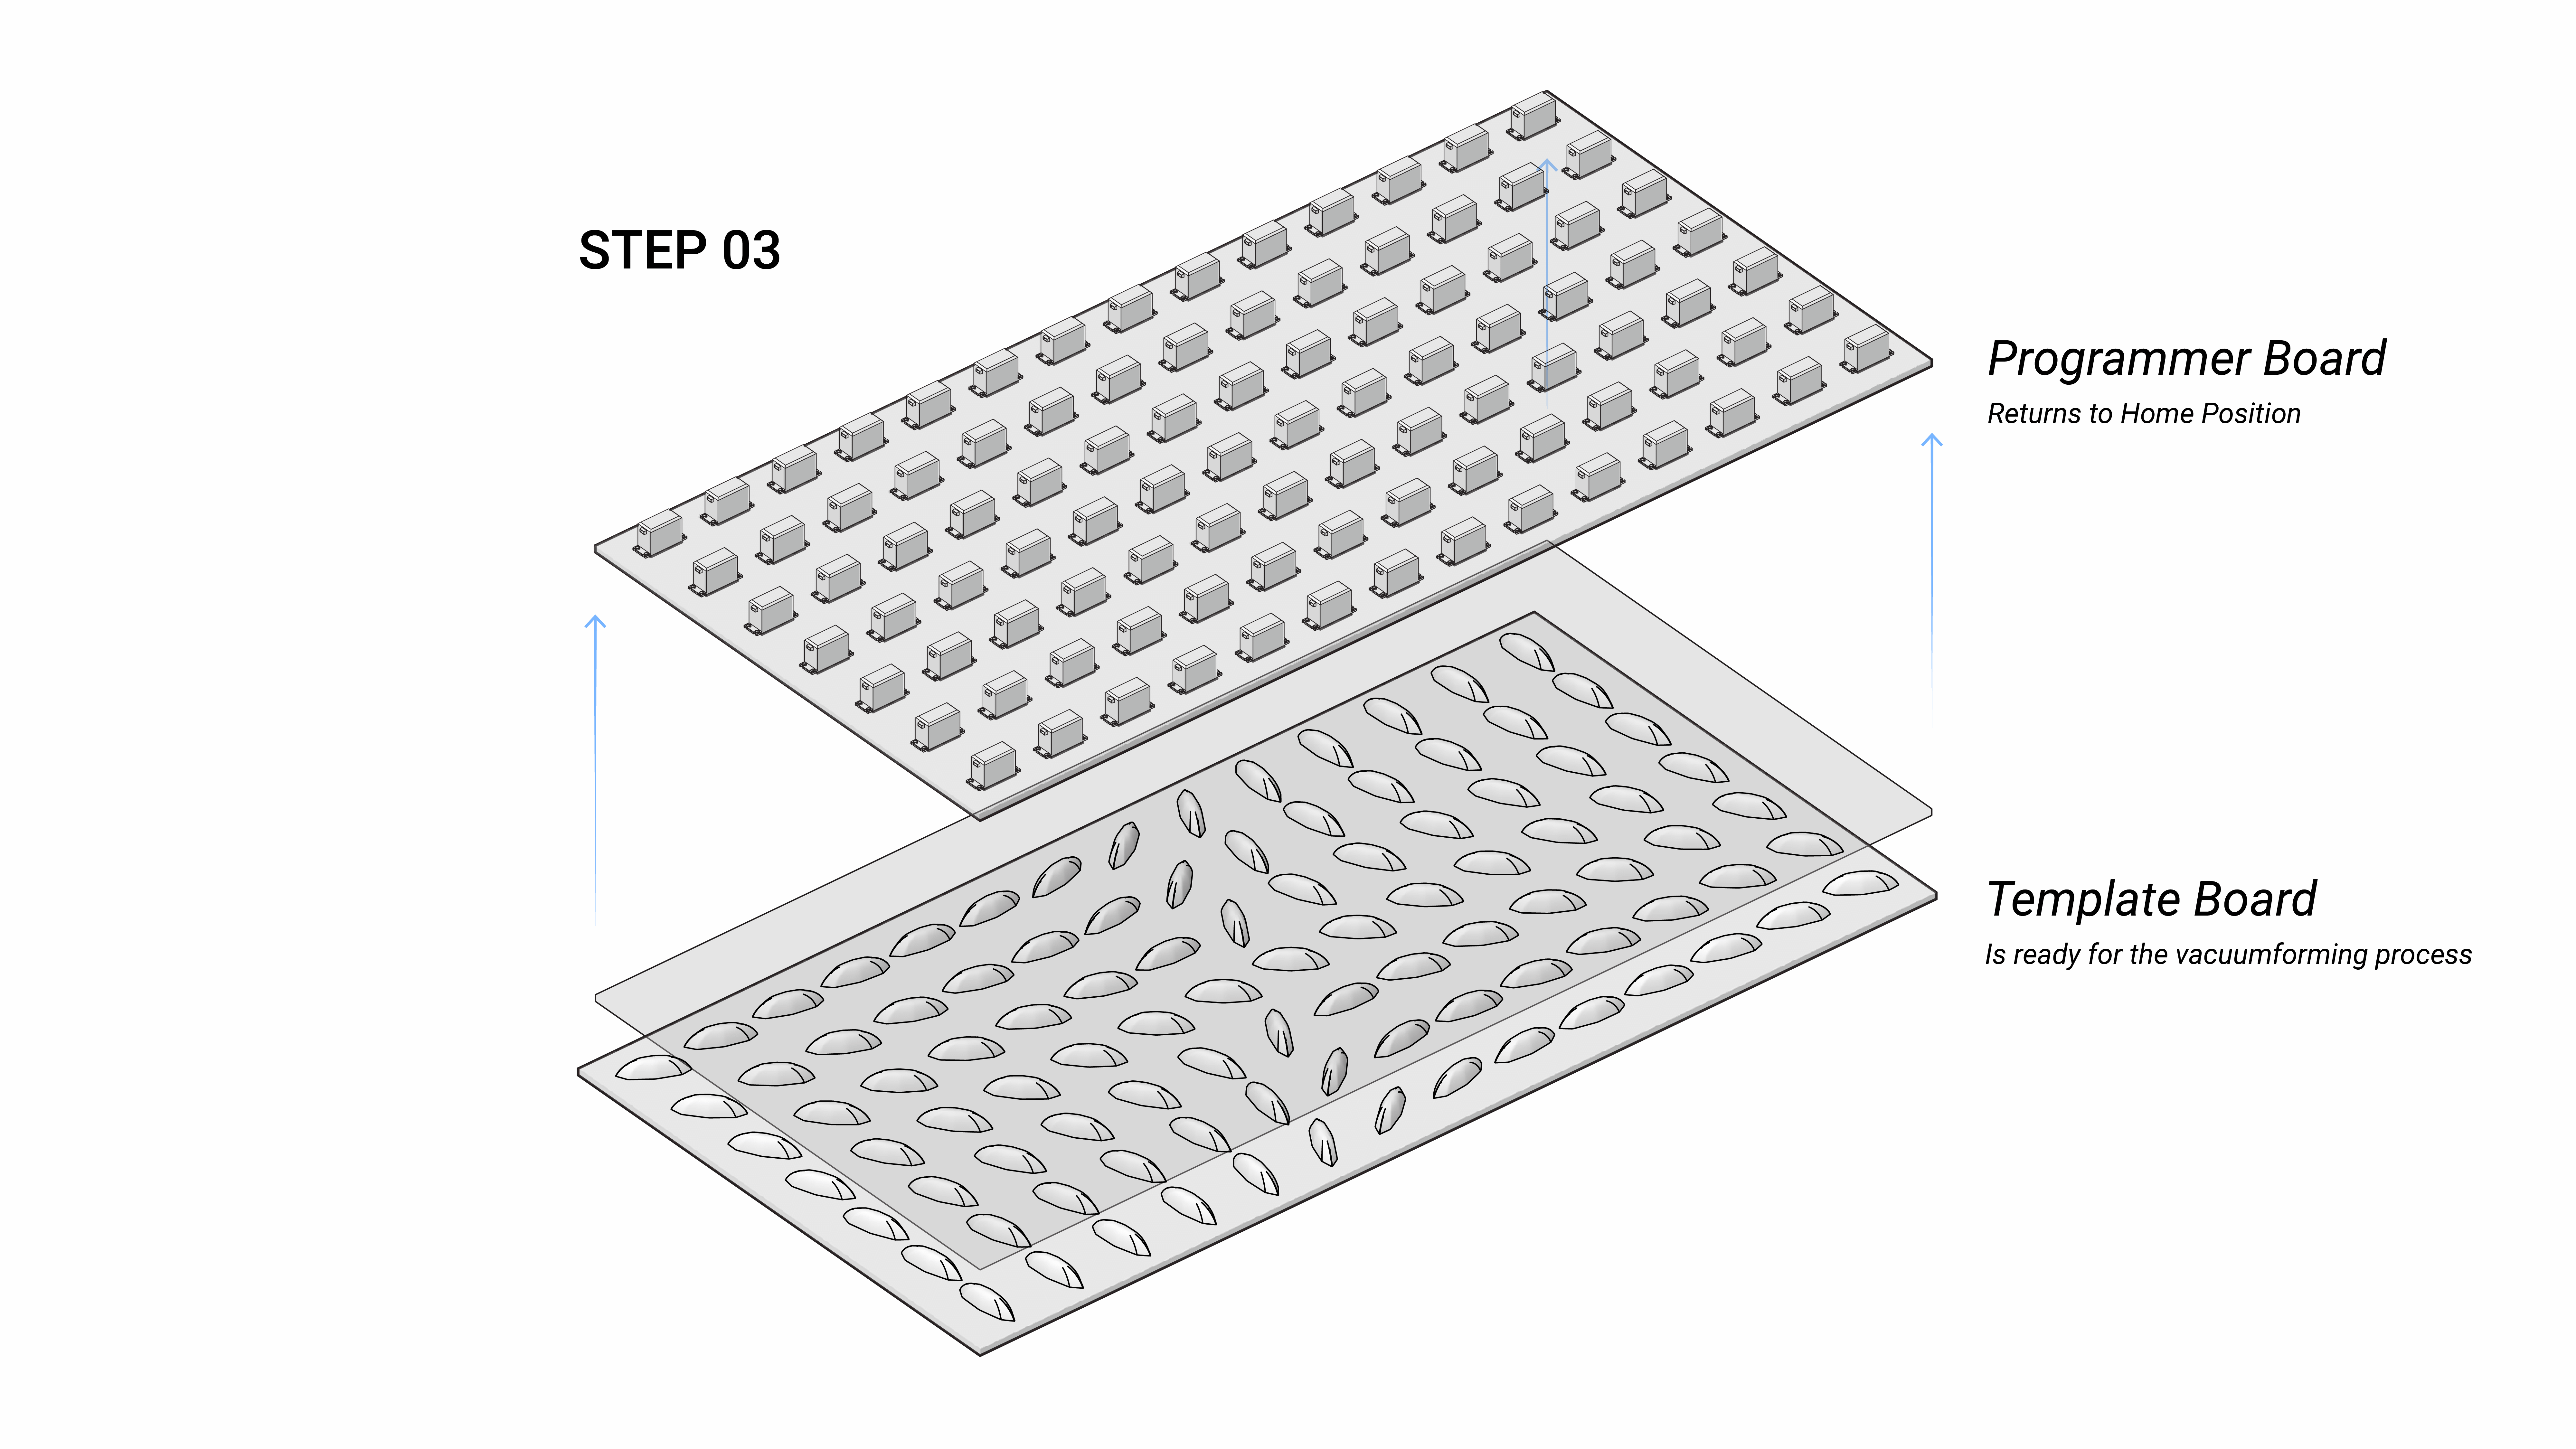 Diagram of step 3 of the MATS workflow, programmer board  releases template board reveling the desired pattern